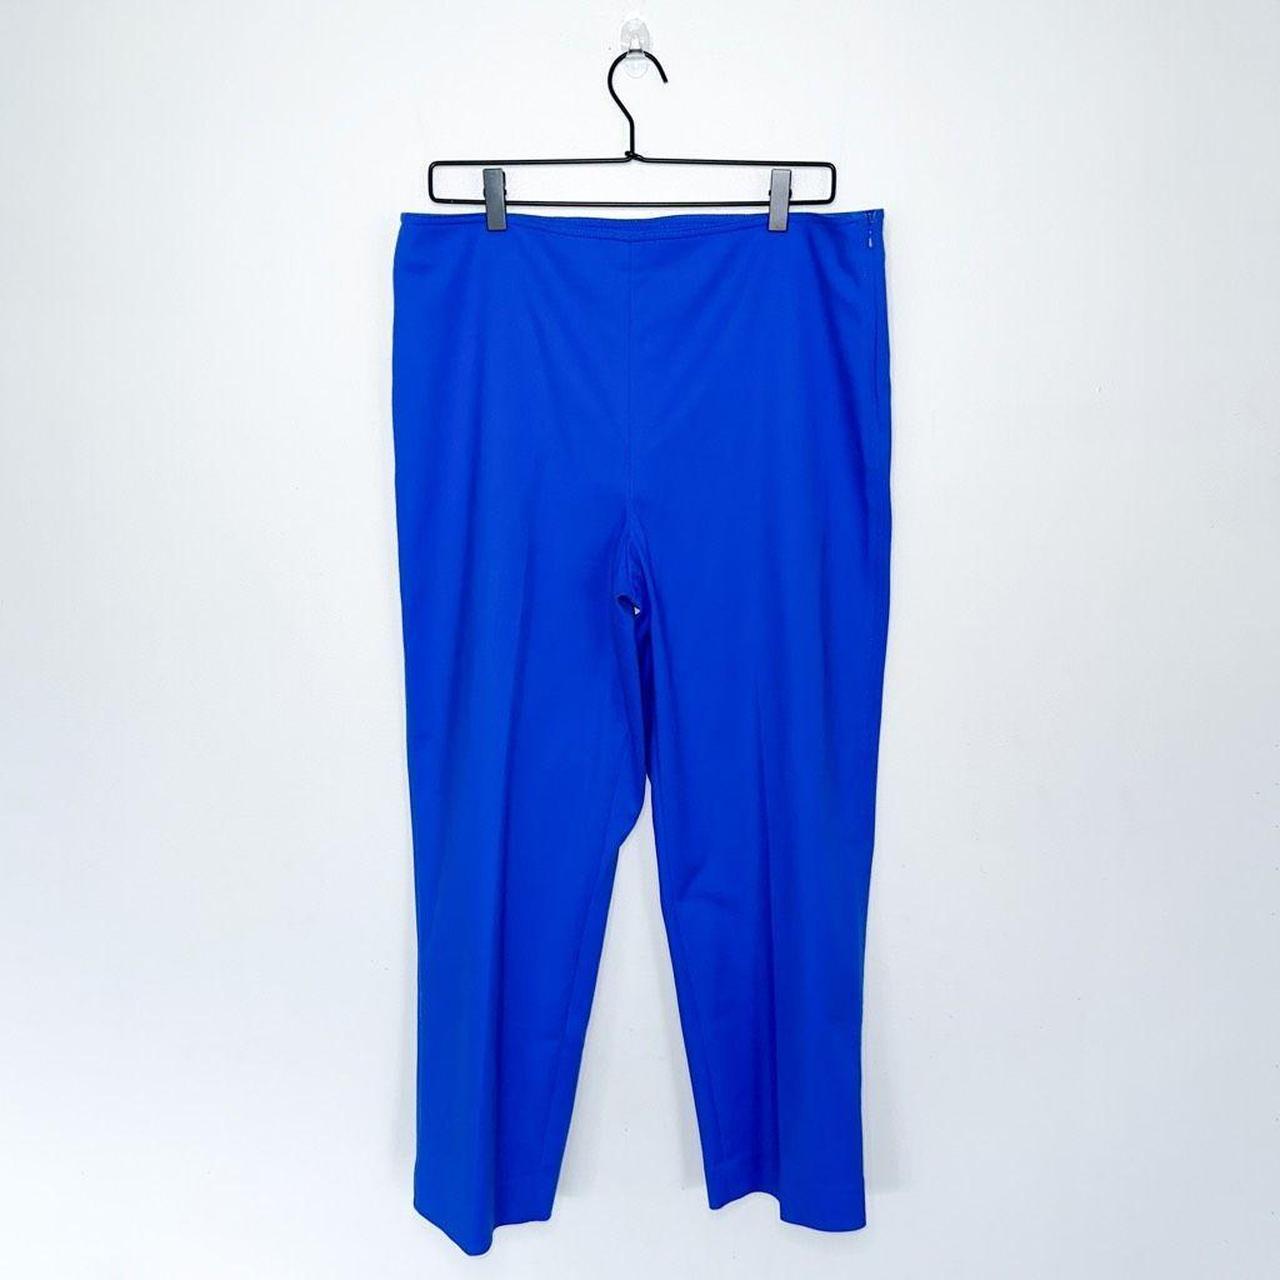 Flared ski trousers - Bright blue - Ladies | H&M IN